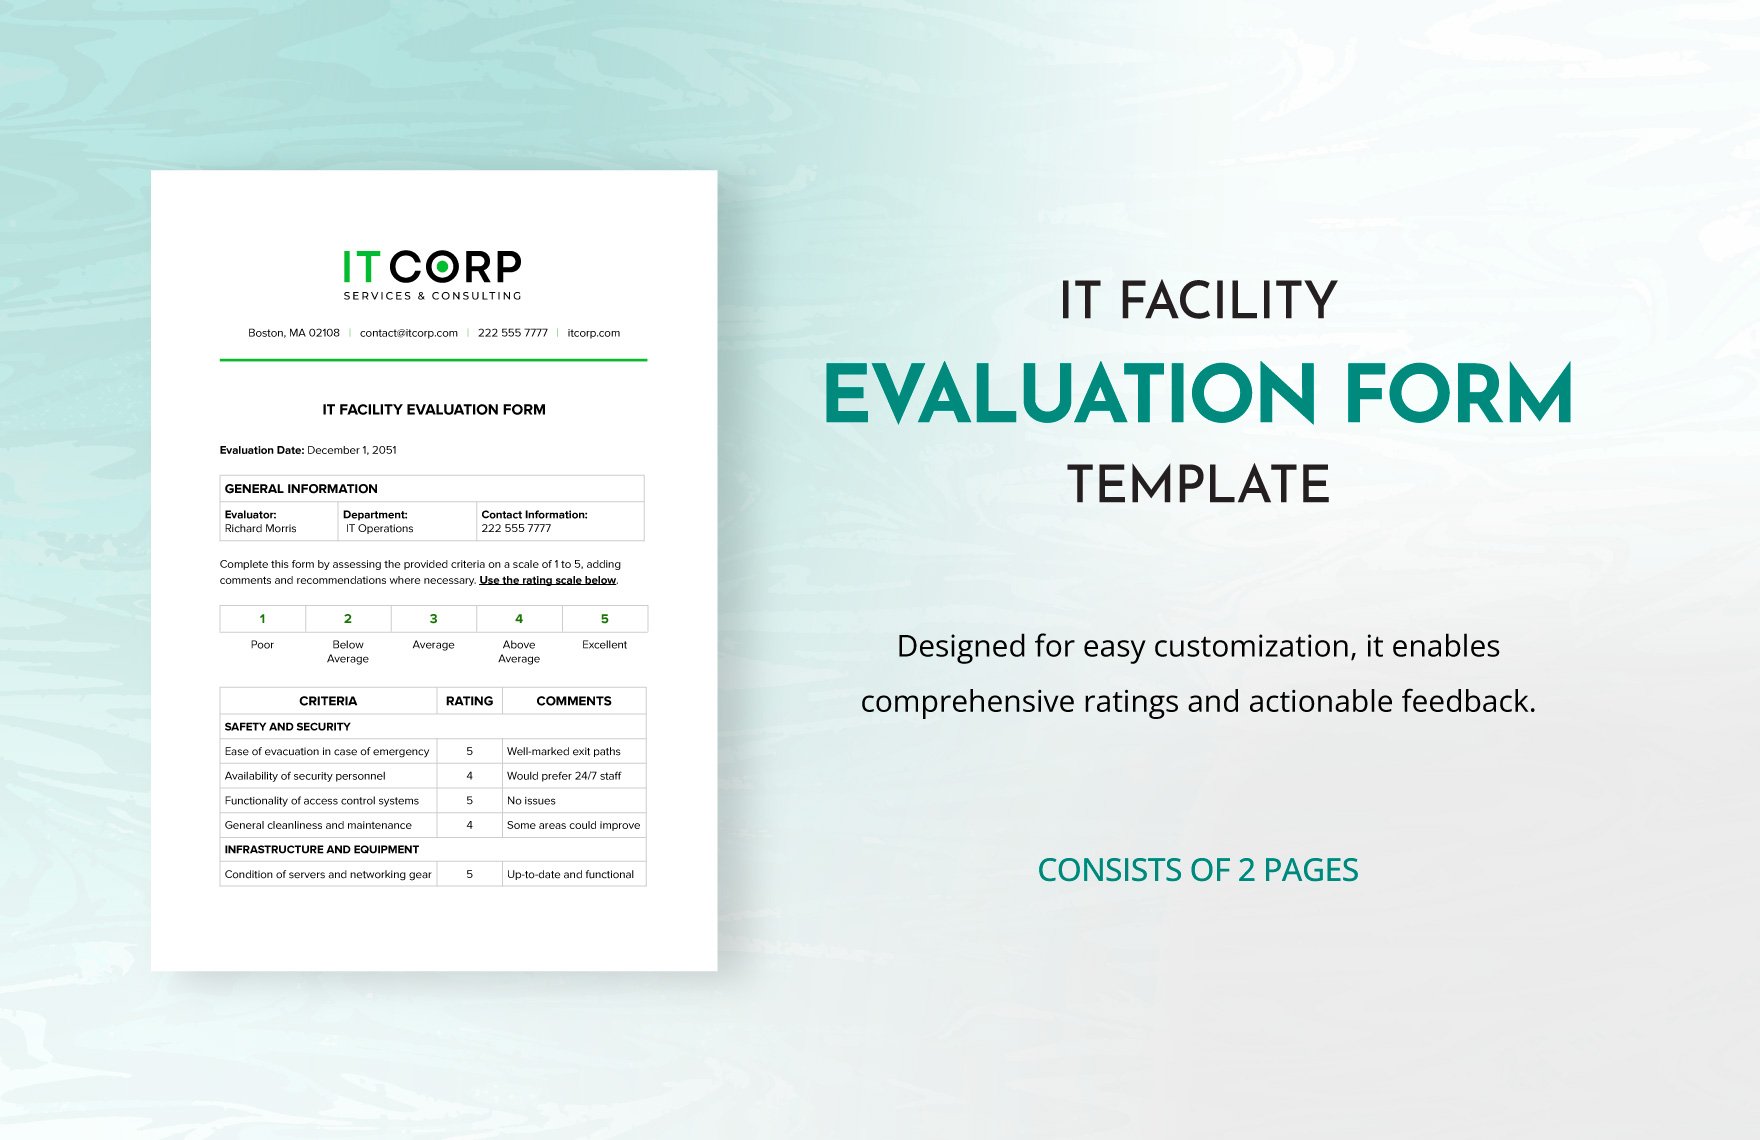 IT Facility Evaluation Form Template